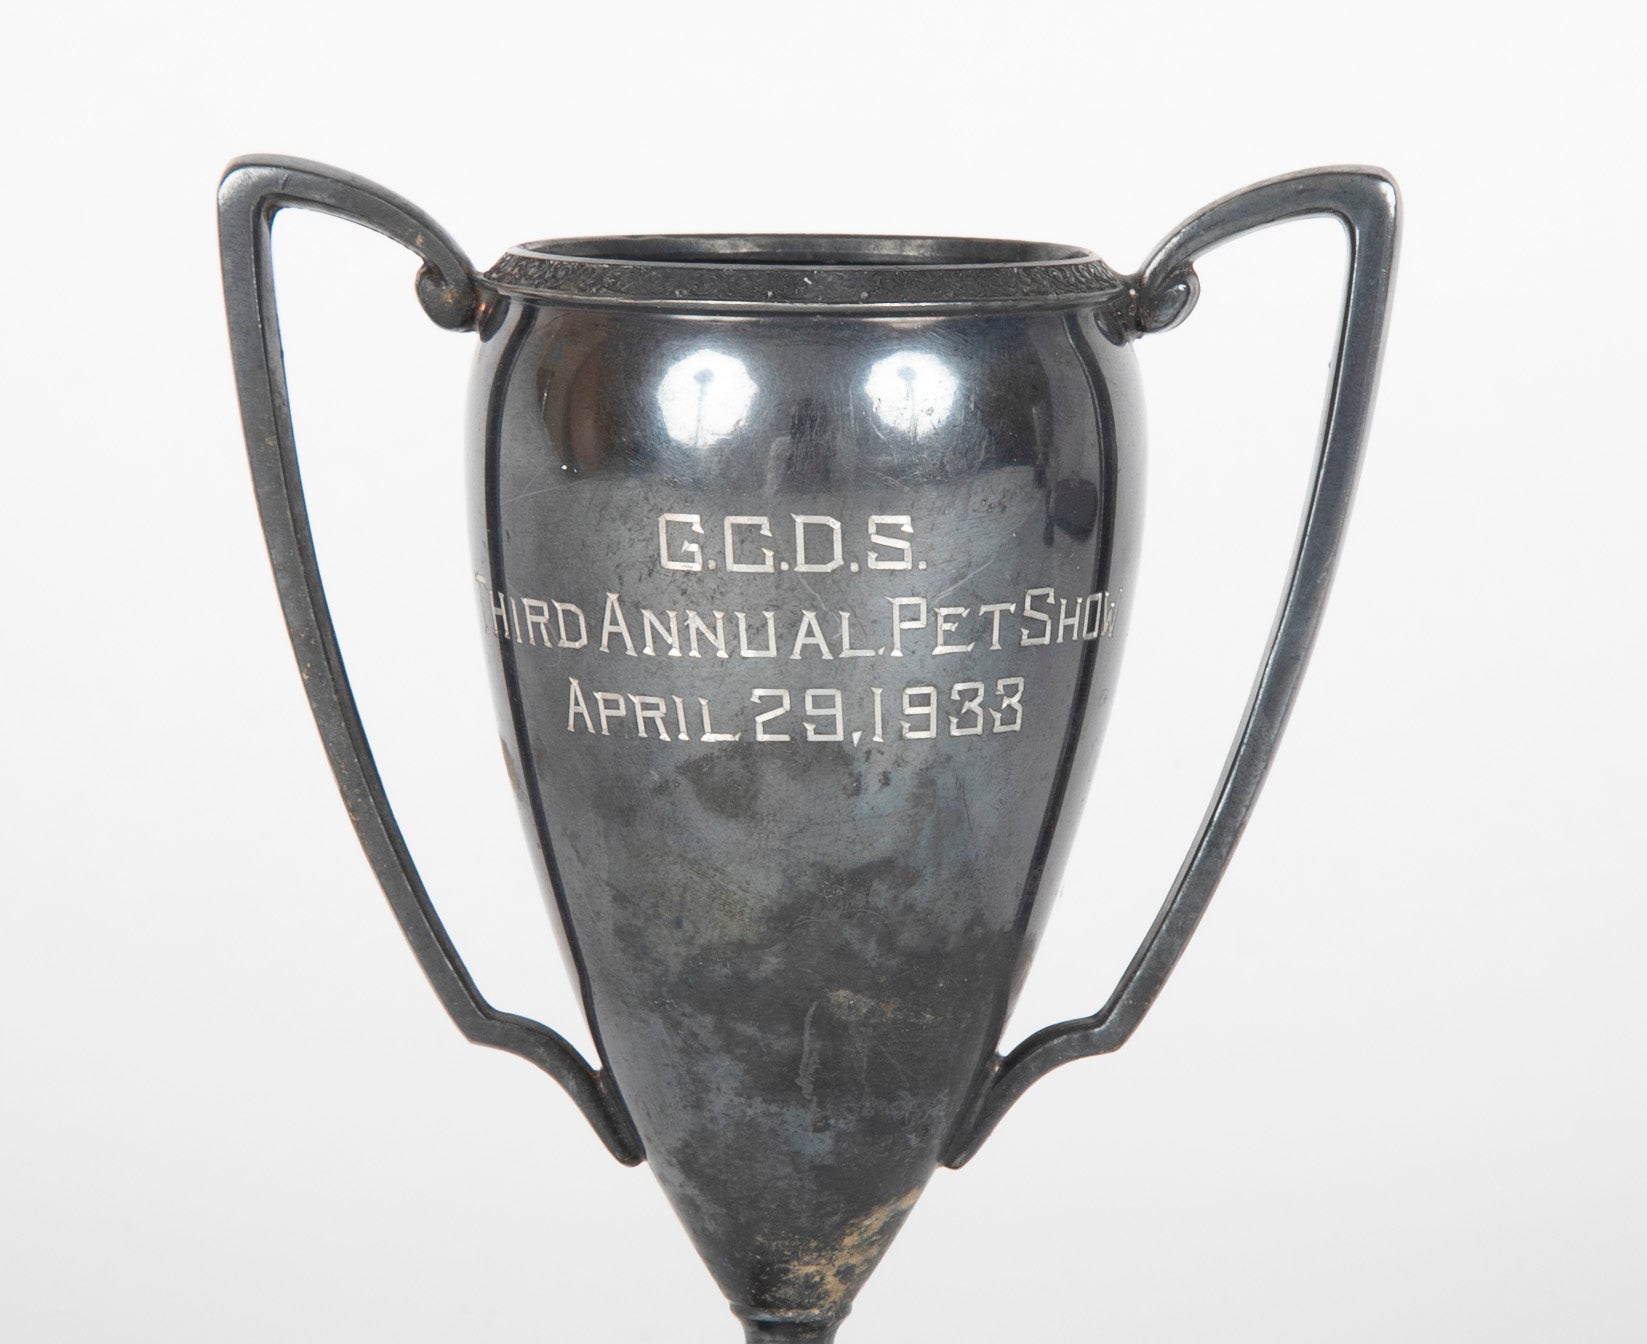 Early 20th Century Set of Three Trophies for Greenwich Academy & GCDS Riding & Pet Shows